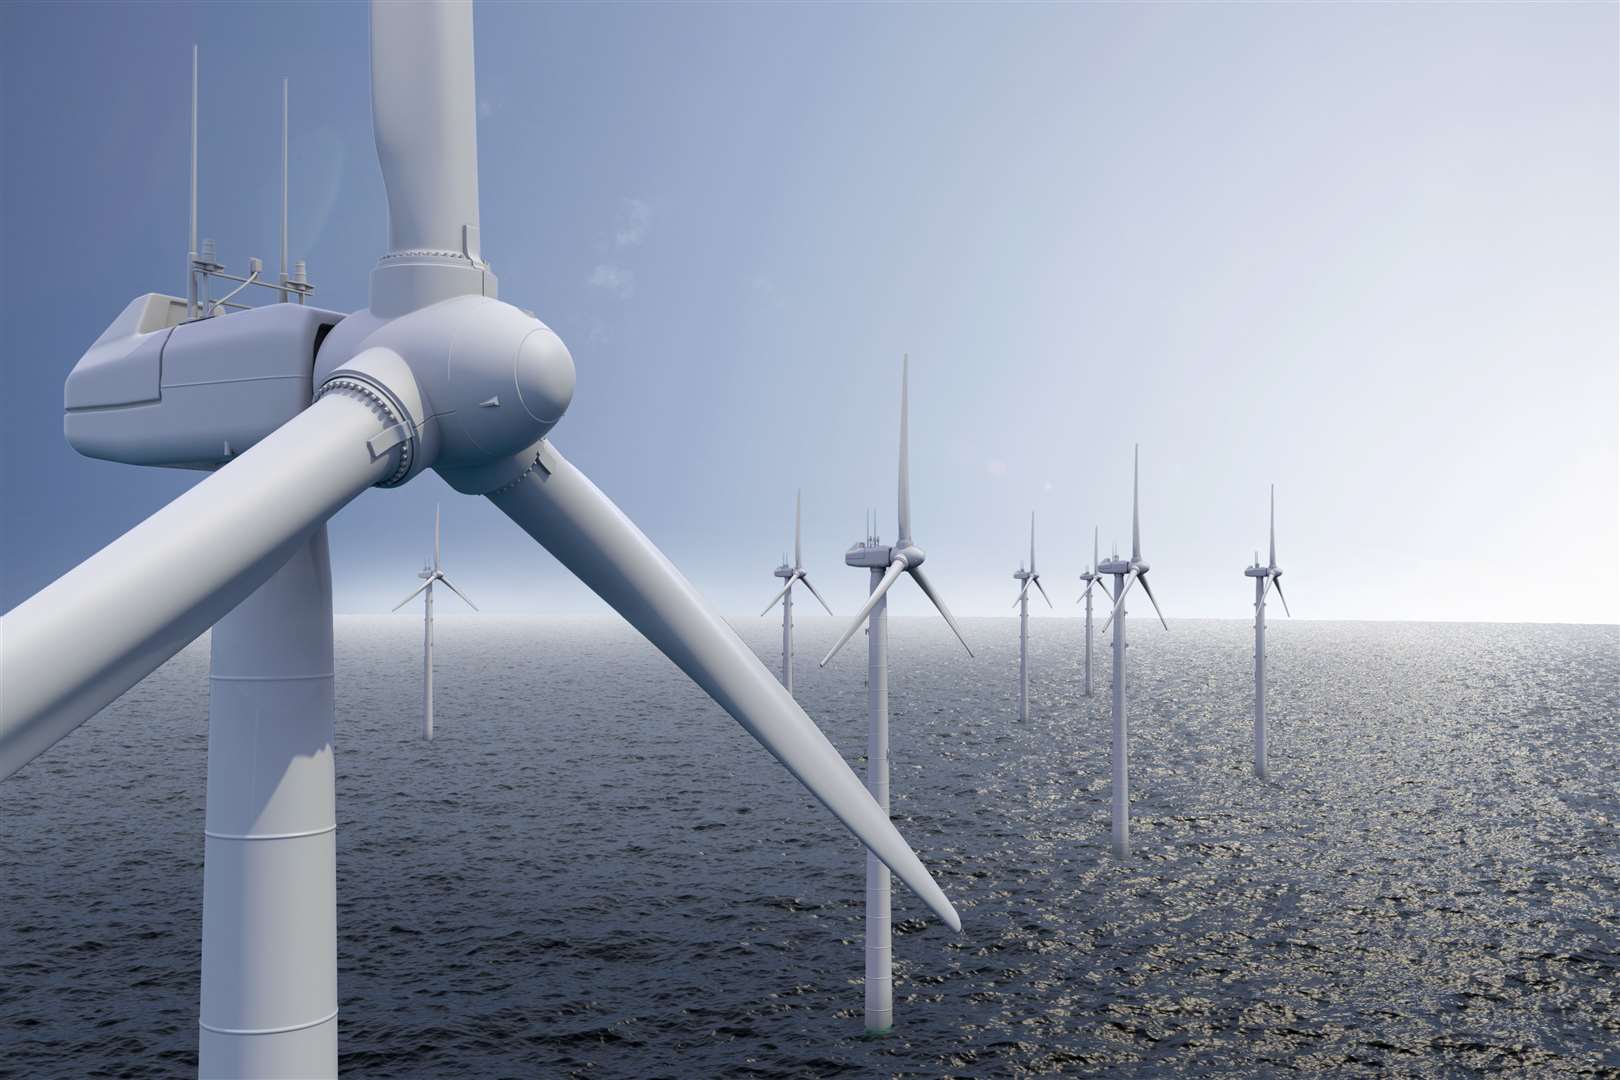 Charges to connect offshore wind to the transmission system in Scotland are already the highest in the GB network, yet are set to double between 2016 and 2026.